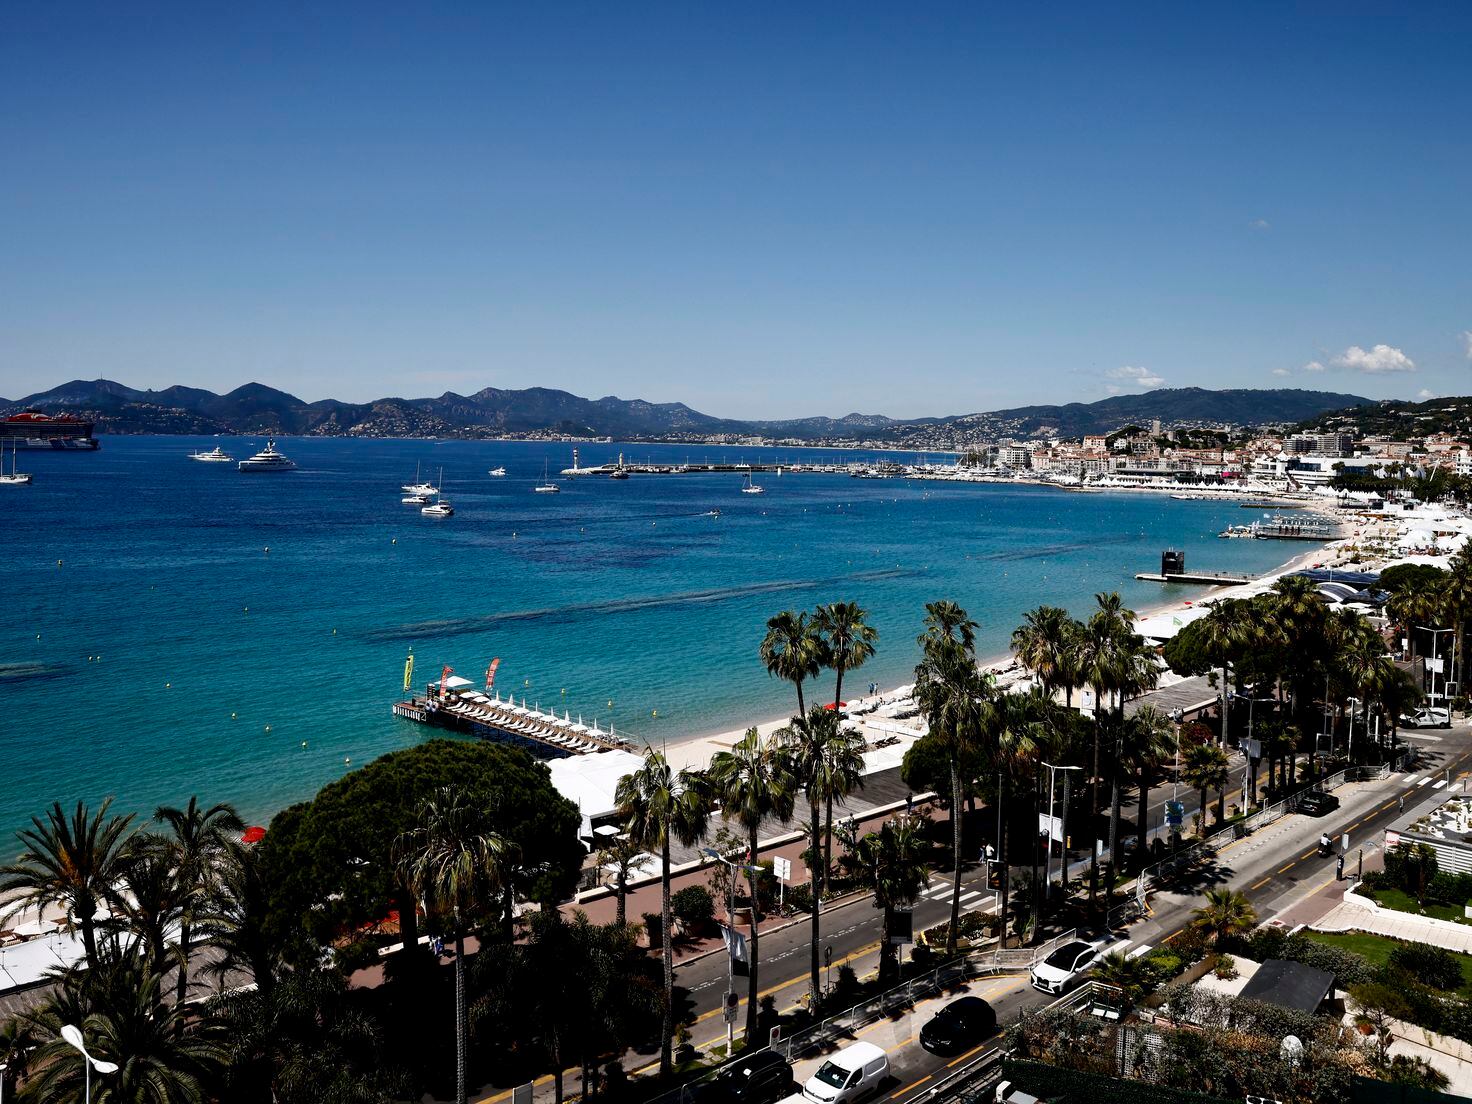 DYK you can attend Cannes Film Festival too? Here's how much you